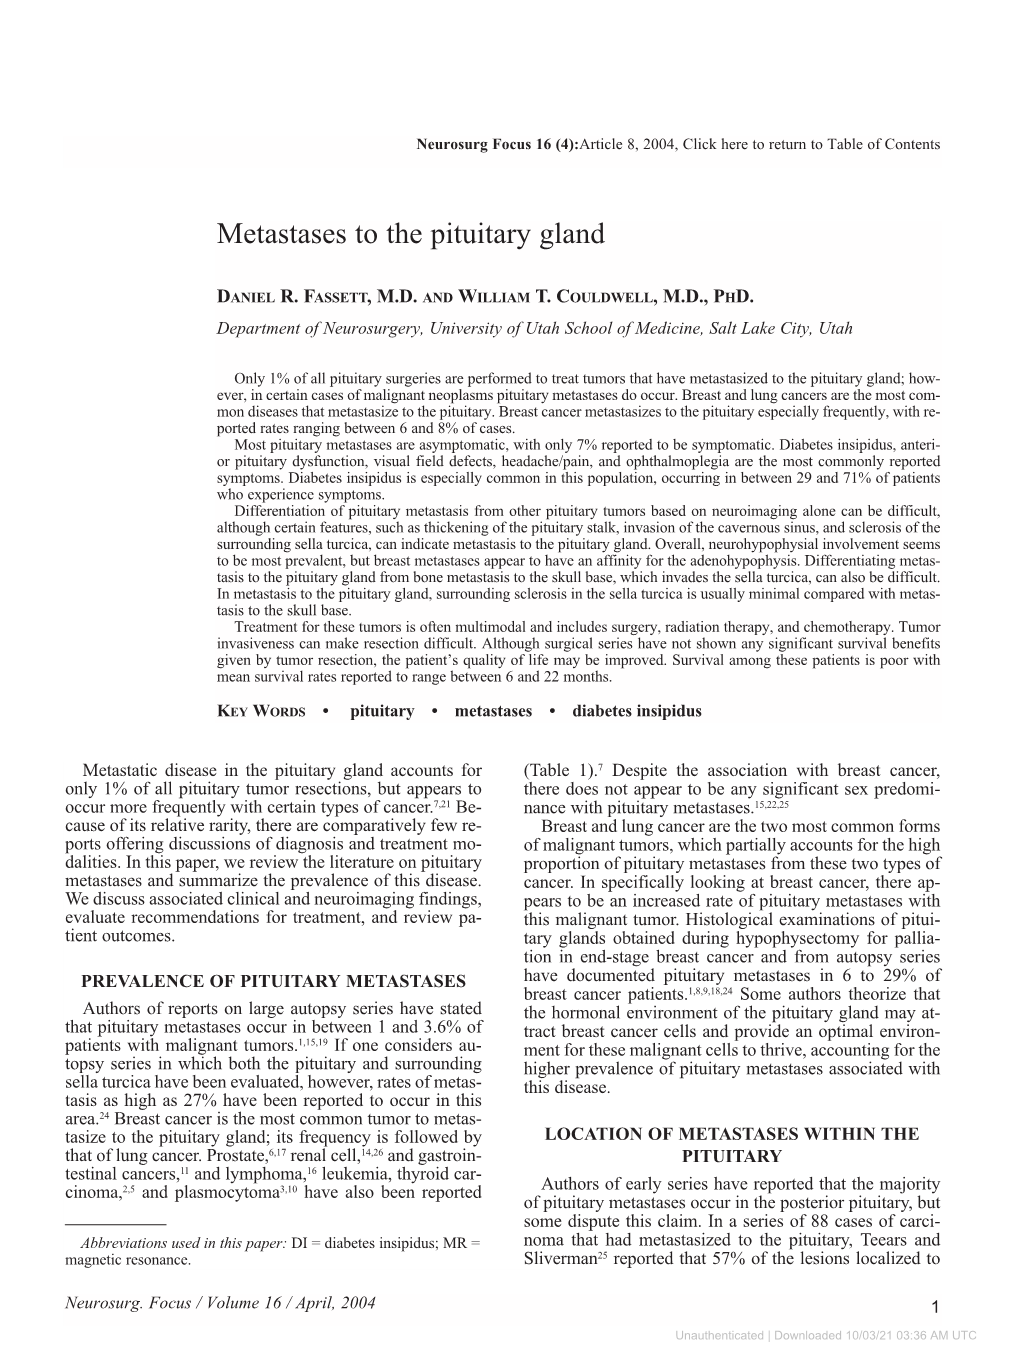 Metastases to the Pituitary Gland